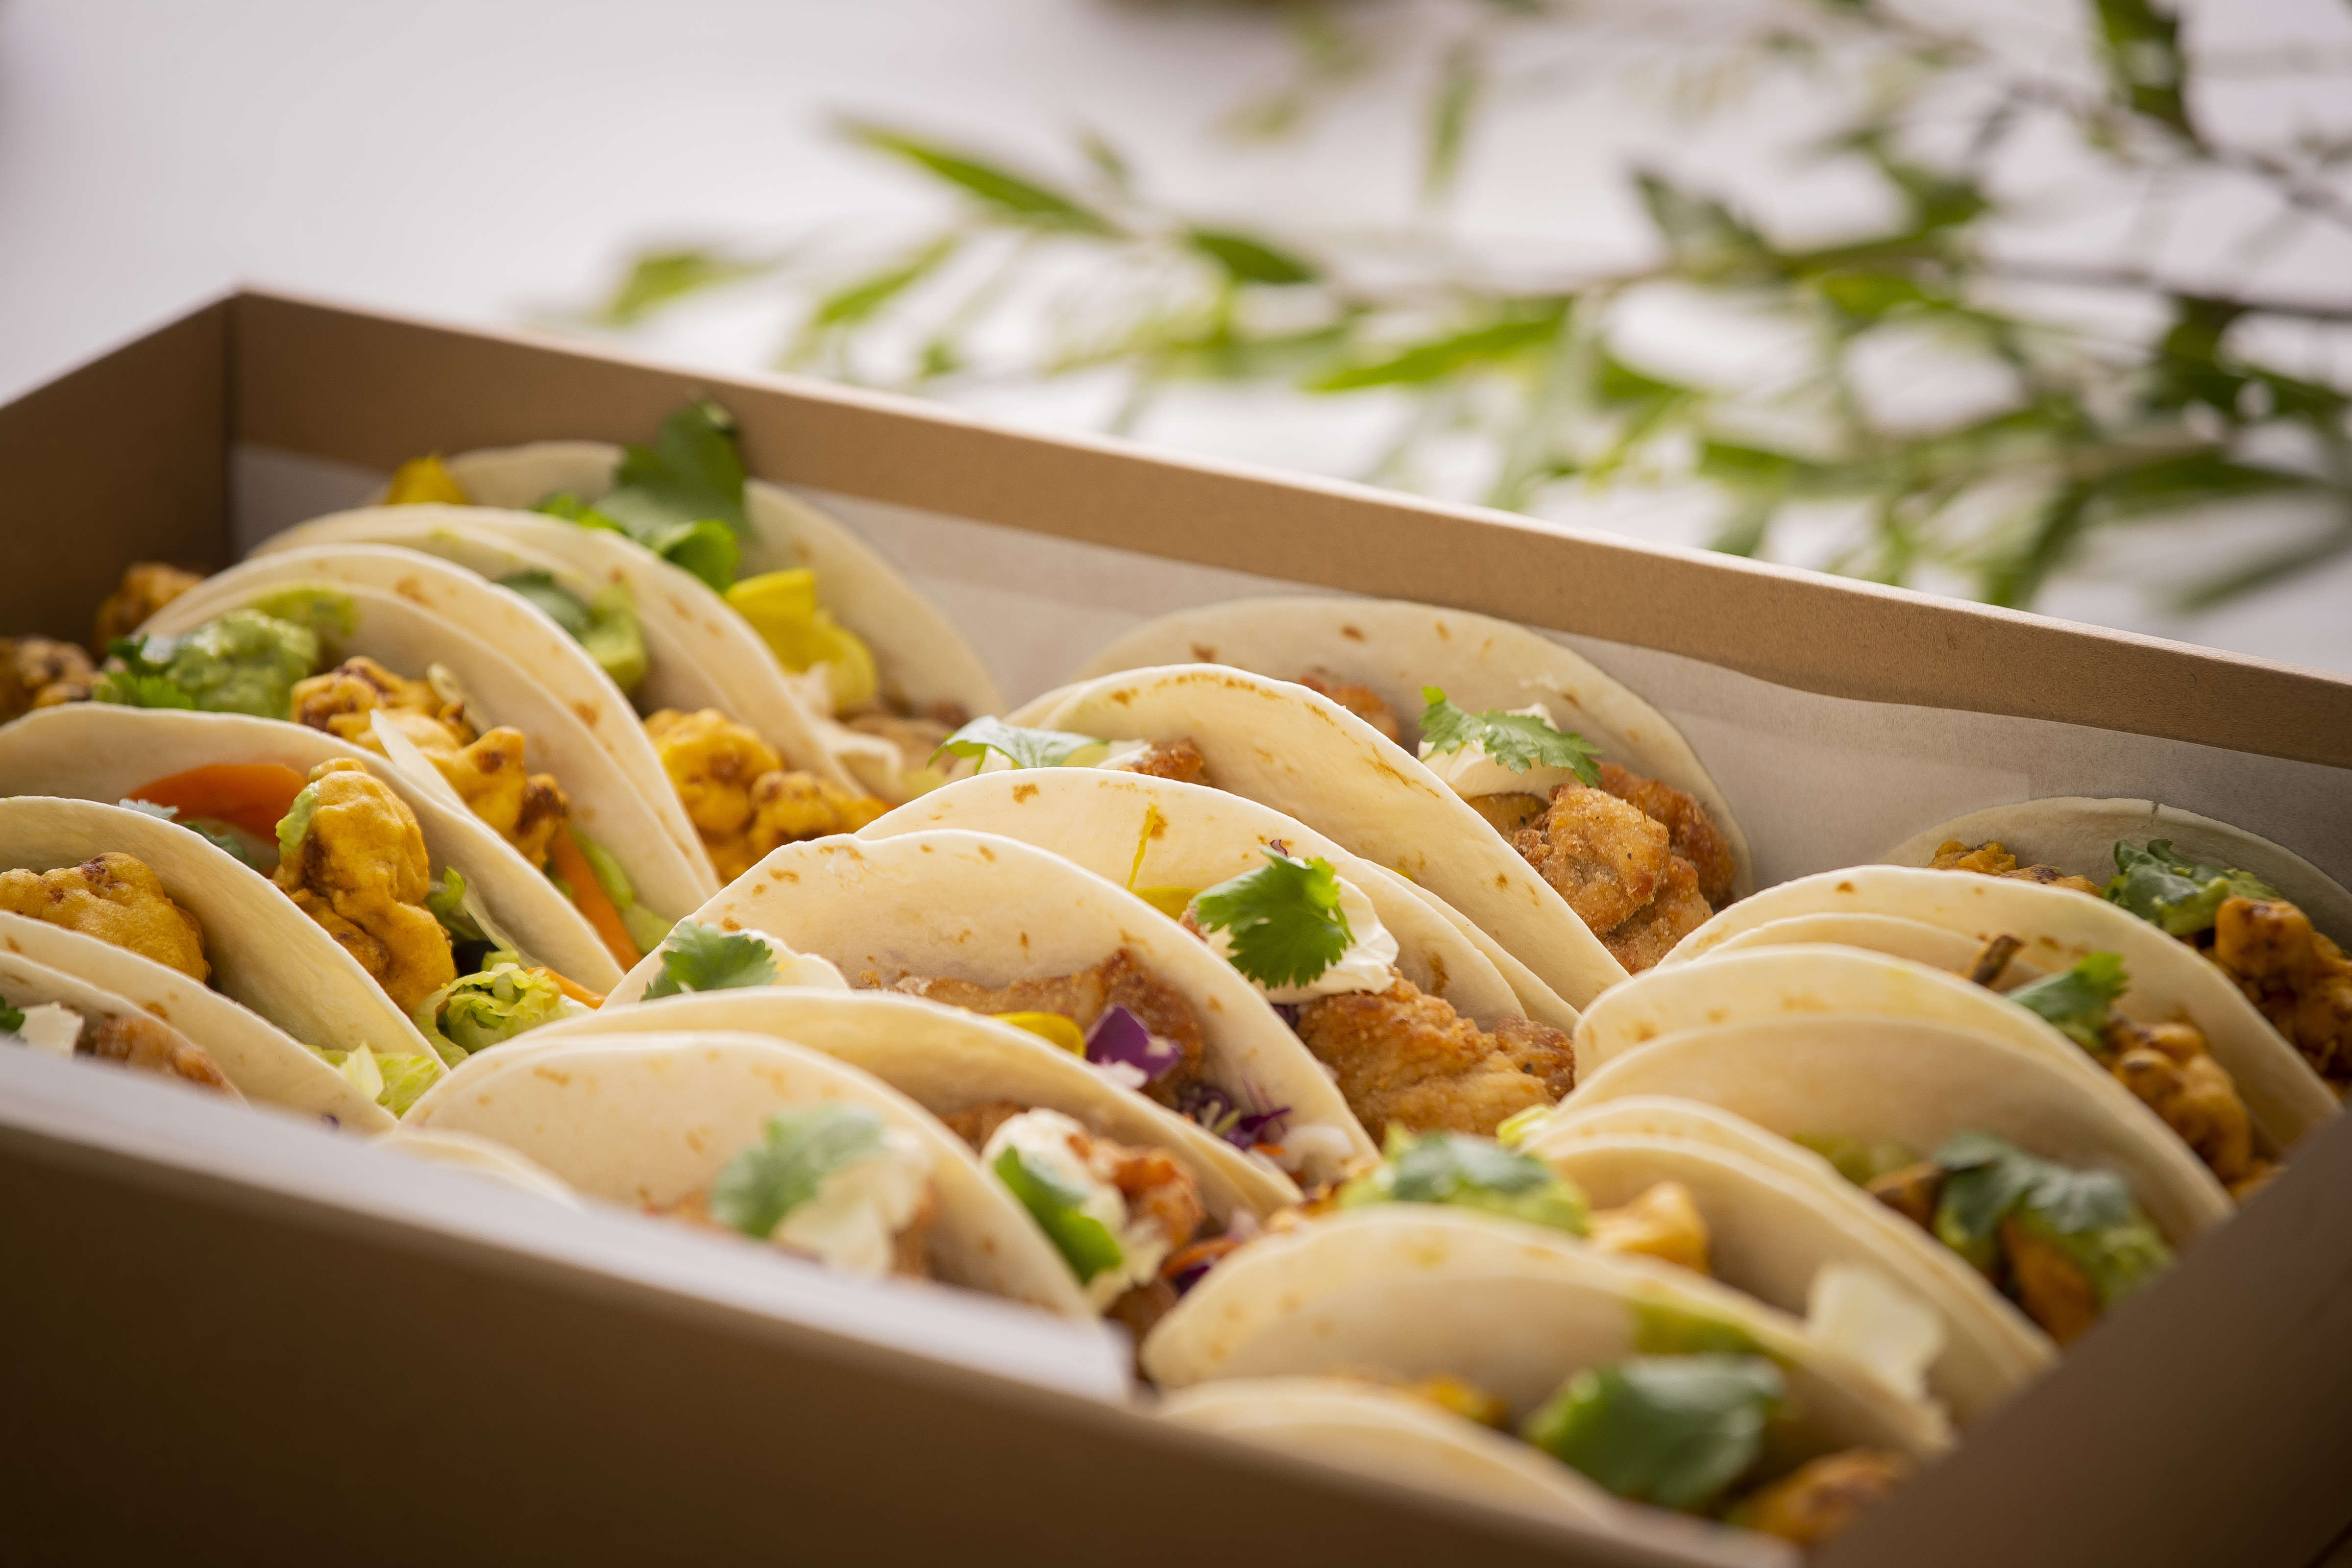 Close up photo of large taco box containing 20 tacos fillings include fried chicken and fried cauliflower. Photo: Richard Jupe.